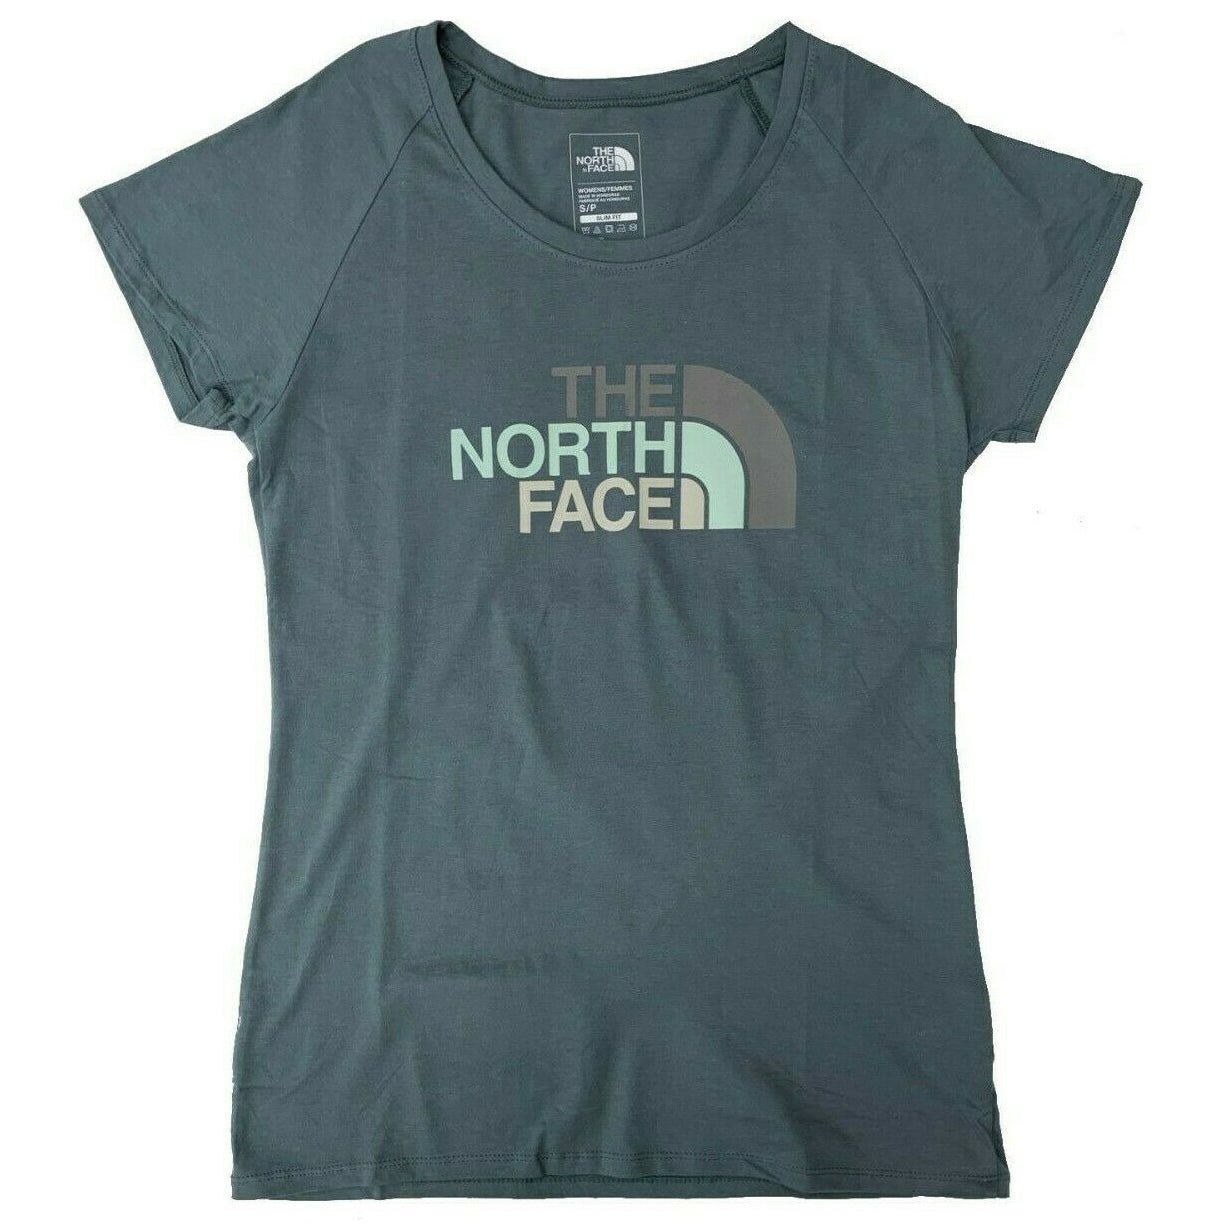 The North Face Women's Short Sleeve Scoop Neck Tee Green/Subtle Green multi